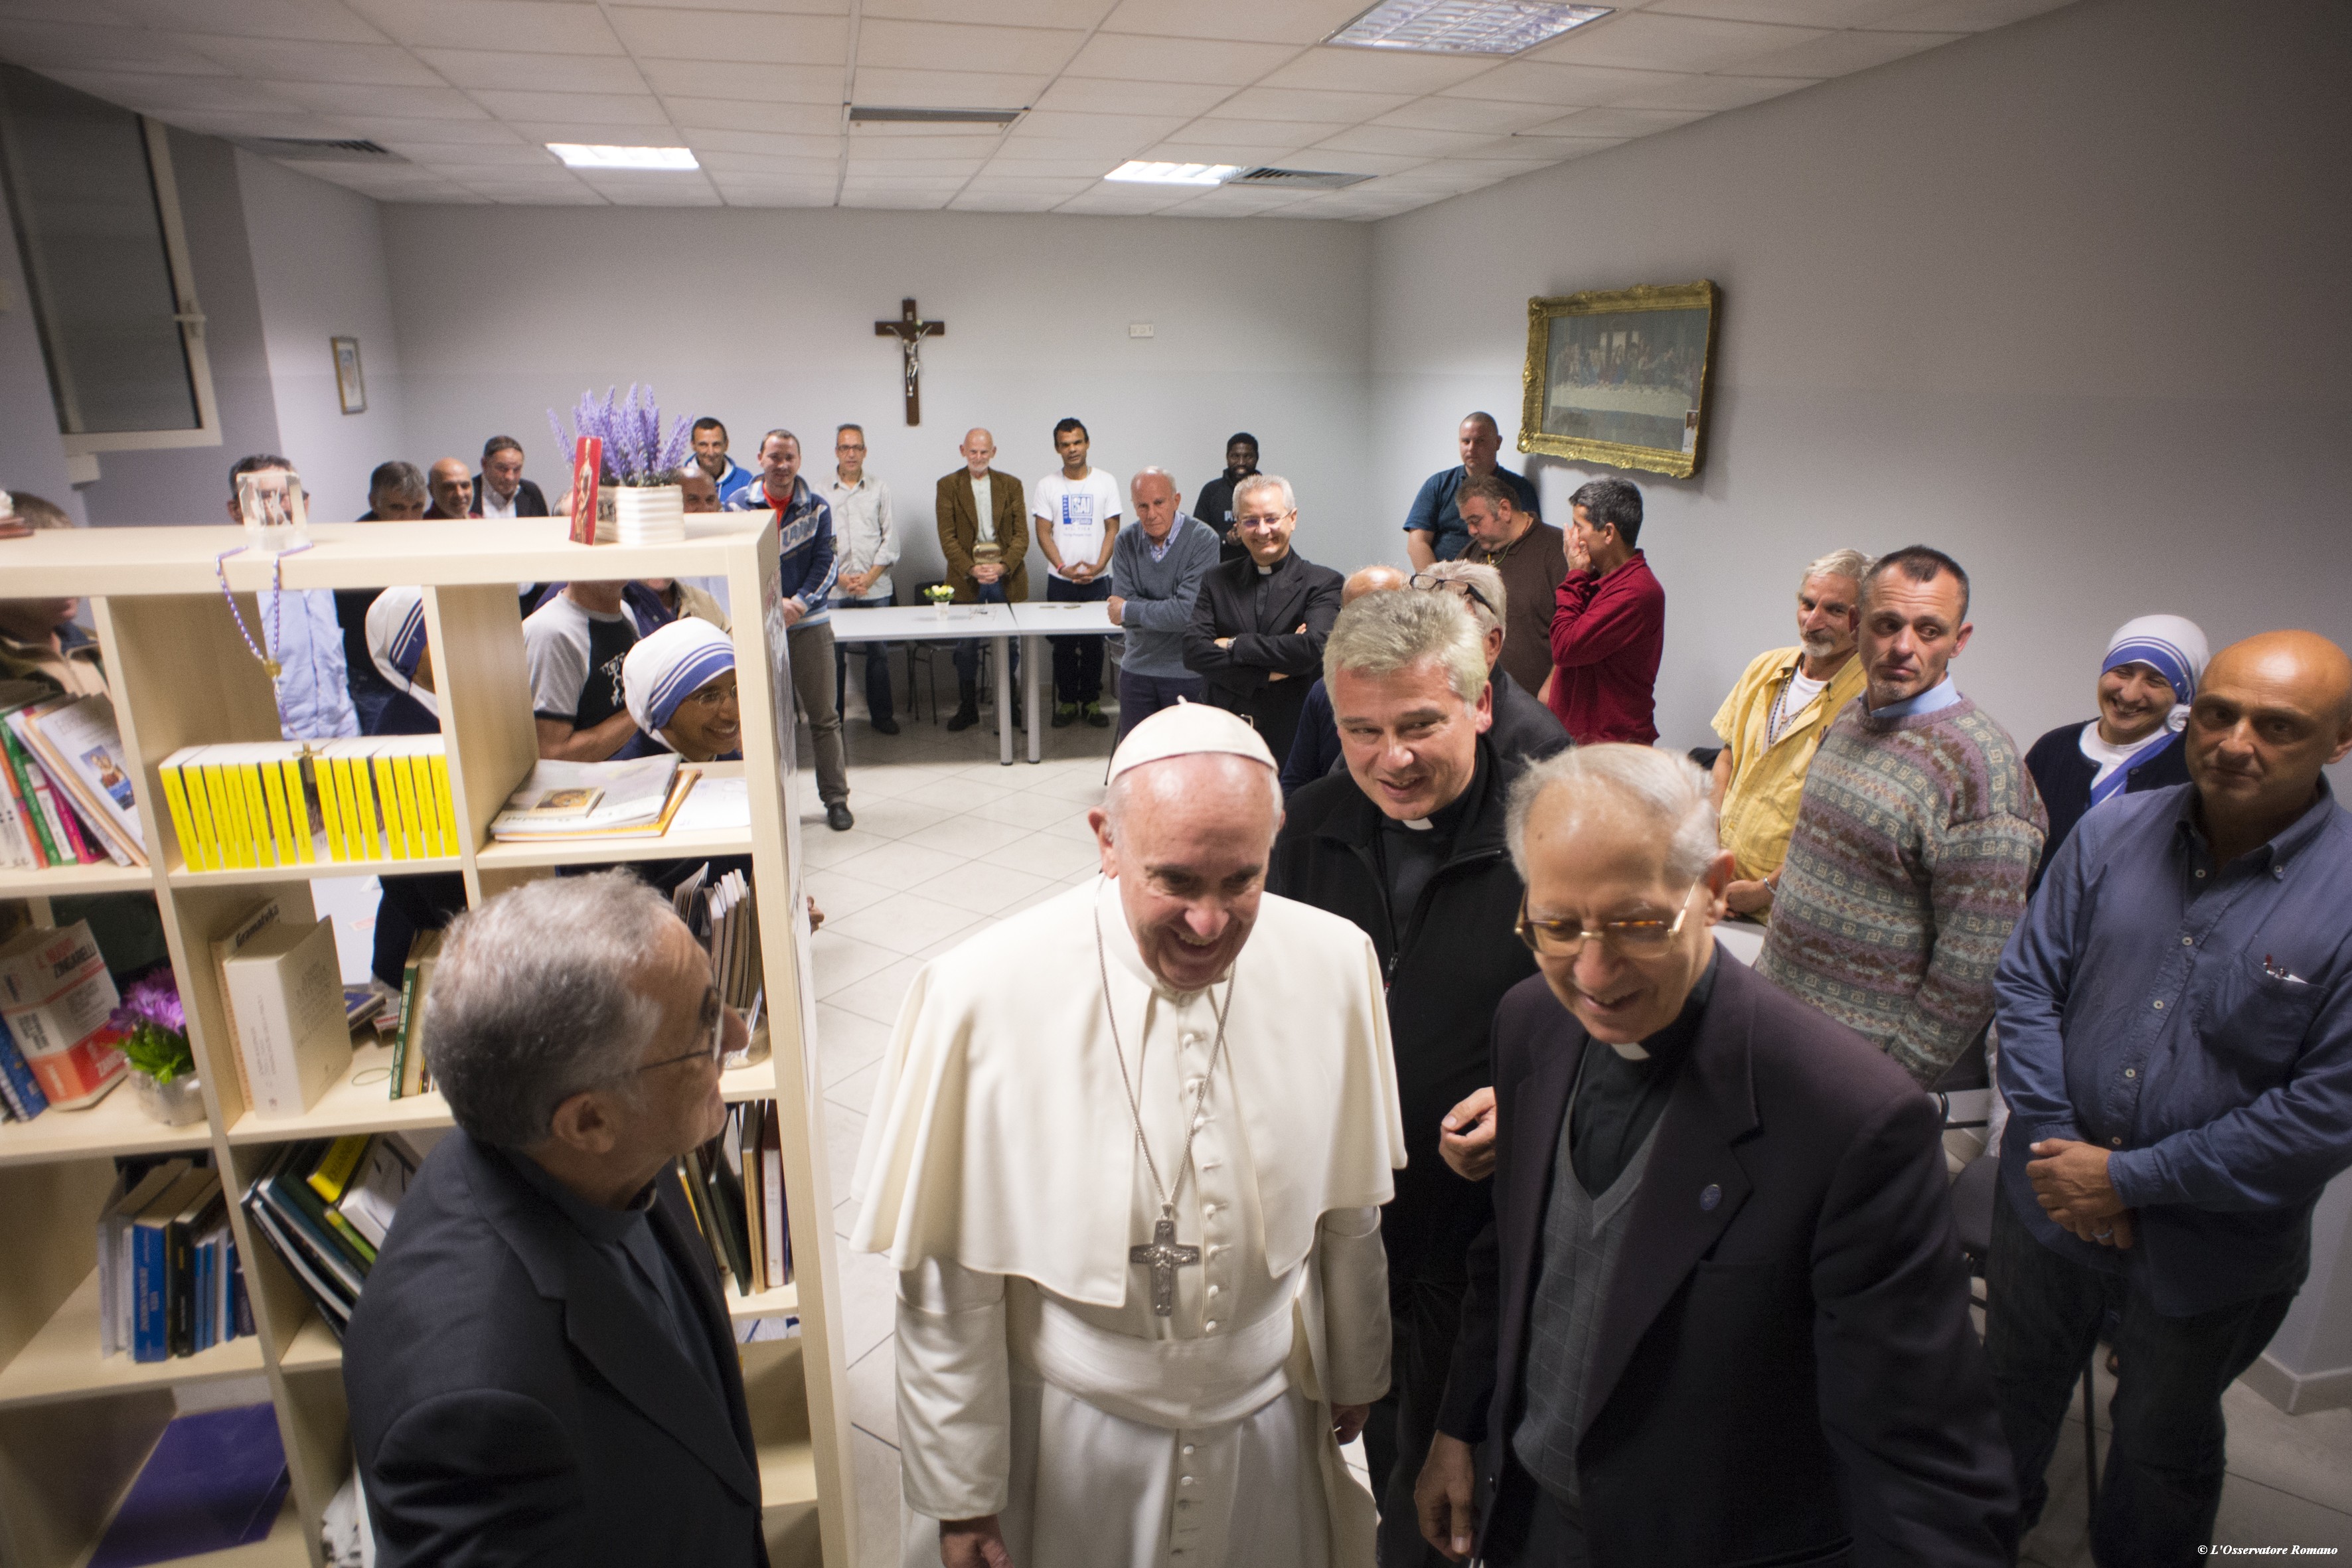 Pope Francis during his visit at the new dormitory for the homeless